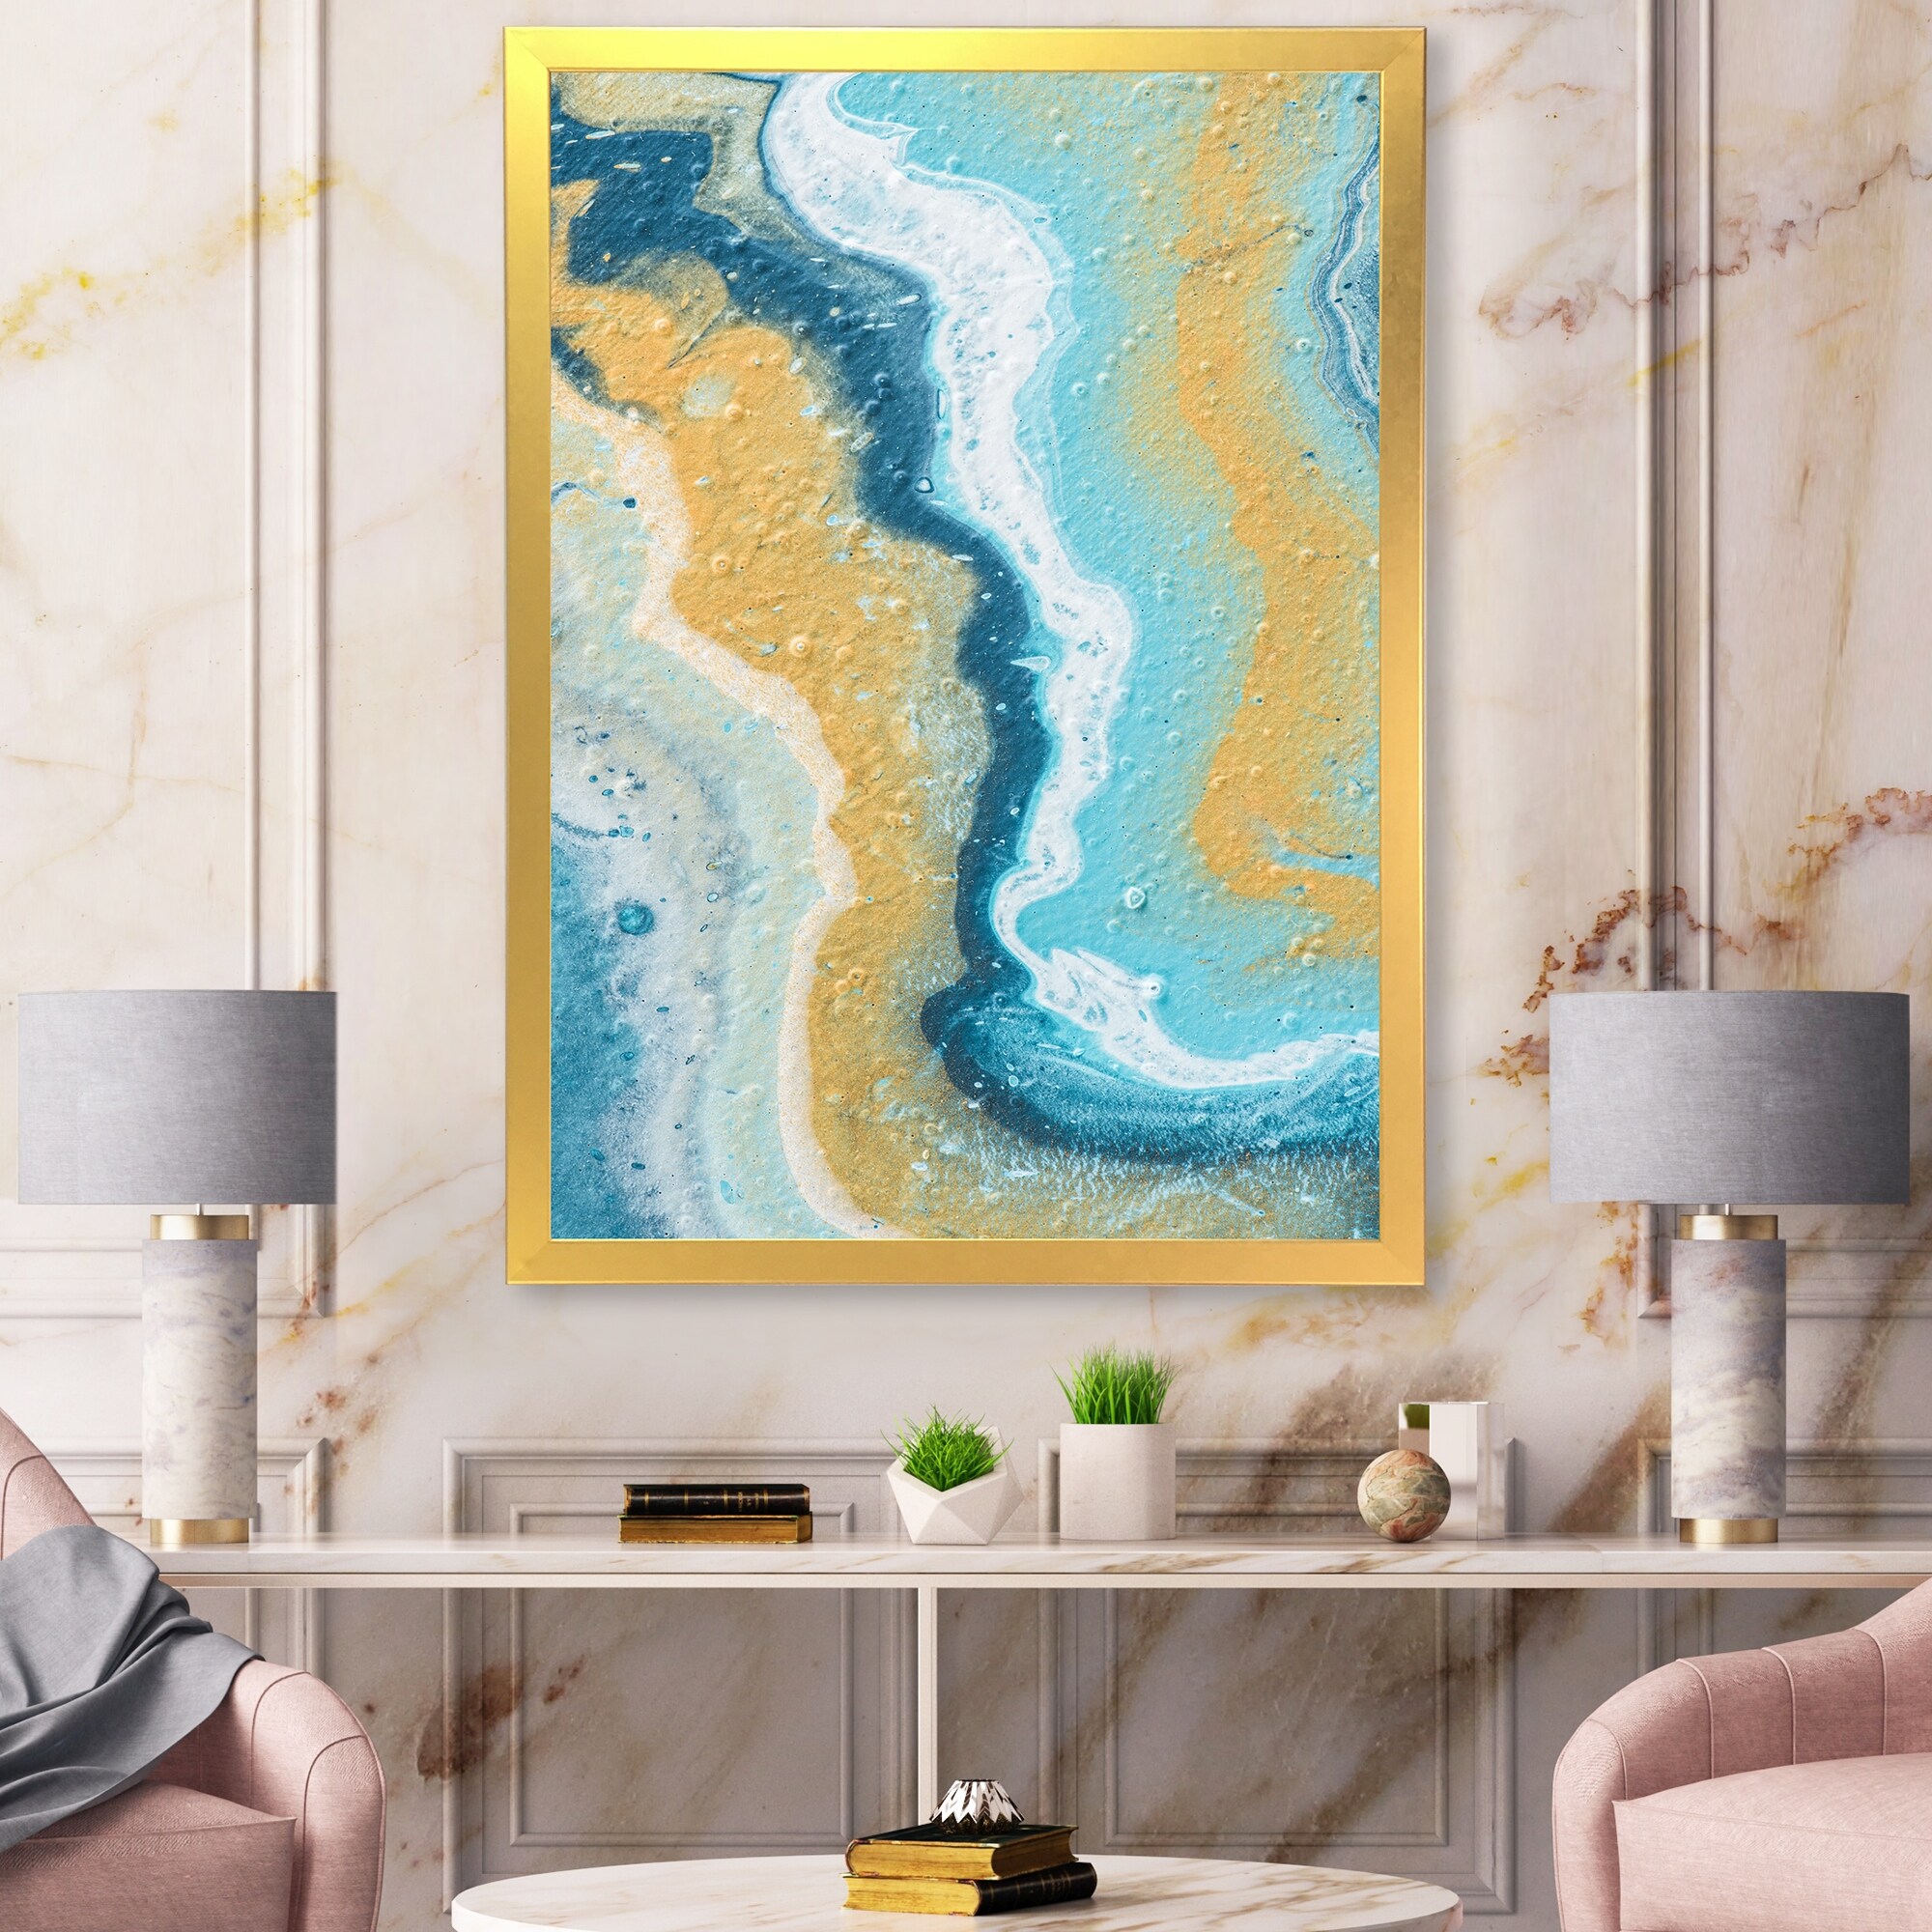 https://ak1.ostkcdn.com/images/products/is/images/direct/9de18b548244368884ffd512ddaea1b6f4028c59/Designart-%27Abstract-Marble-Composition-In-Yellow-and-Blue-III%27-Modern-Framed-Art-Print.jpg